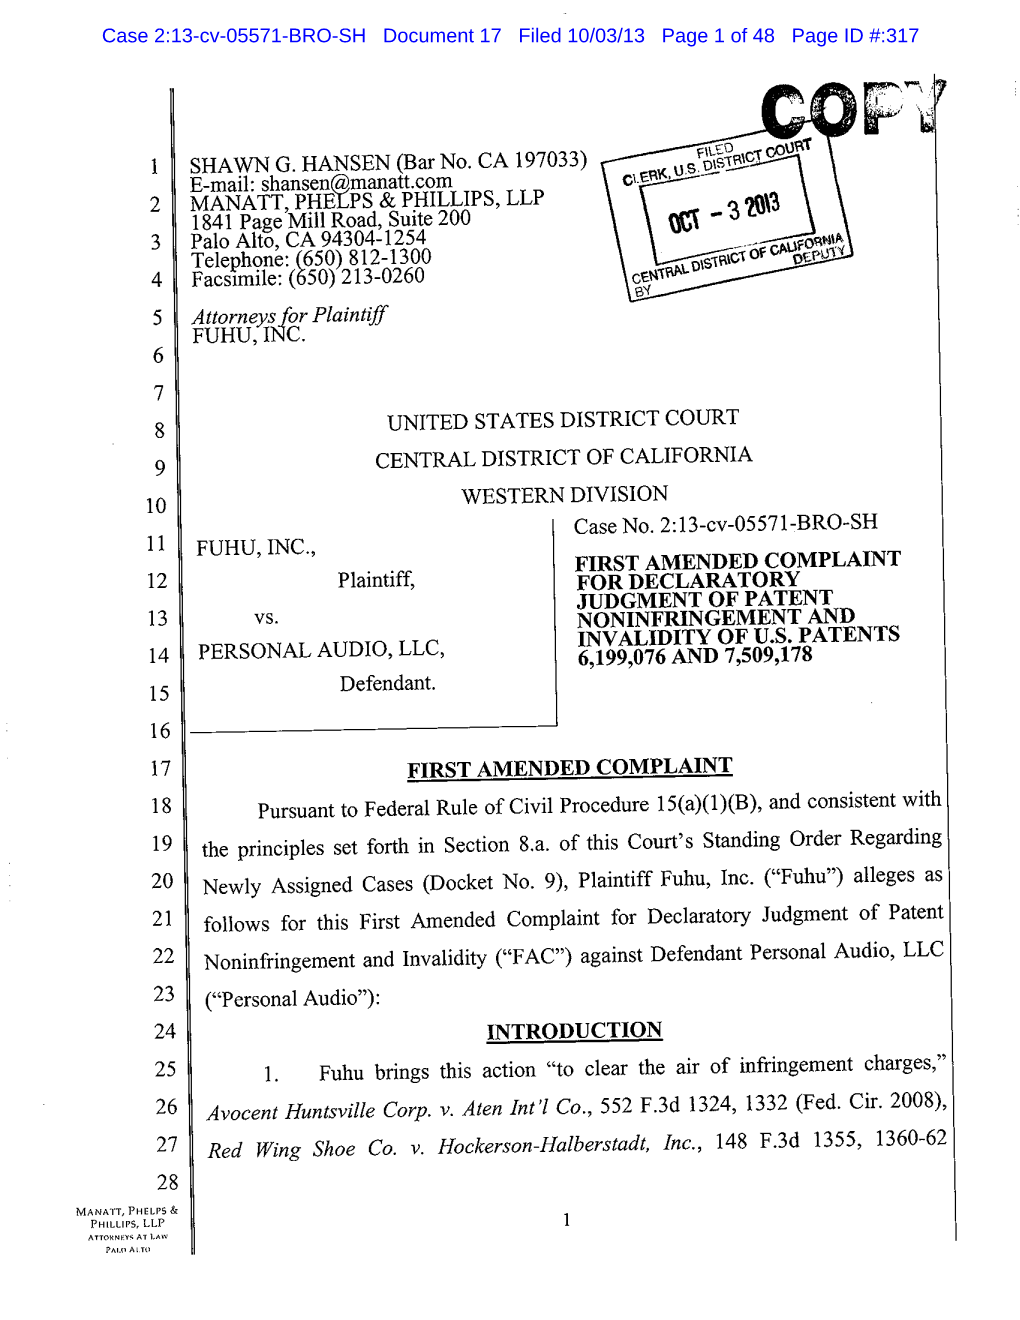 Case 2:13-Cv-05571-BRO-SH Document 17 Filed 10/03/13 Page 1 of 48 Page ID #:317 Case 2:13-Cv-05571-BRO-SH Document 17 Filed 10/03/13 Page 2 of 48 Page ID #:318